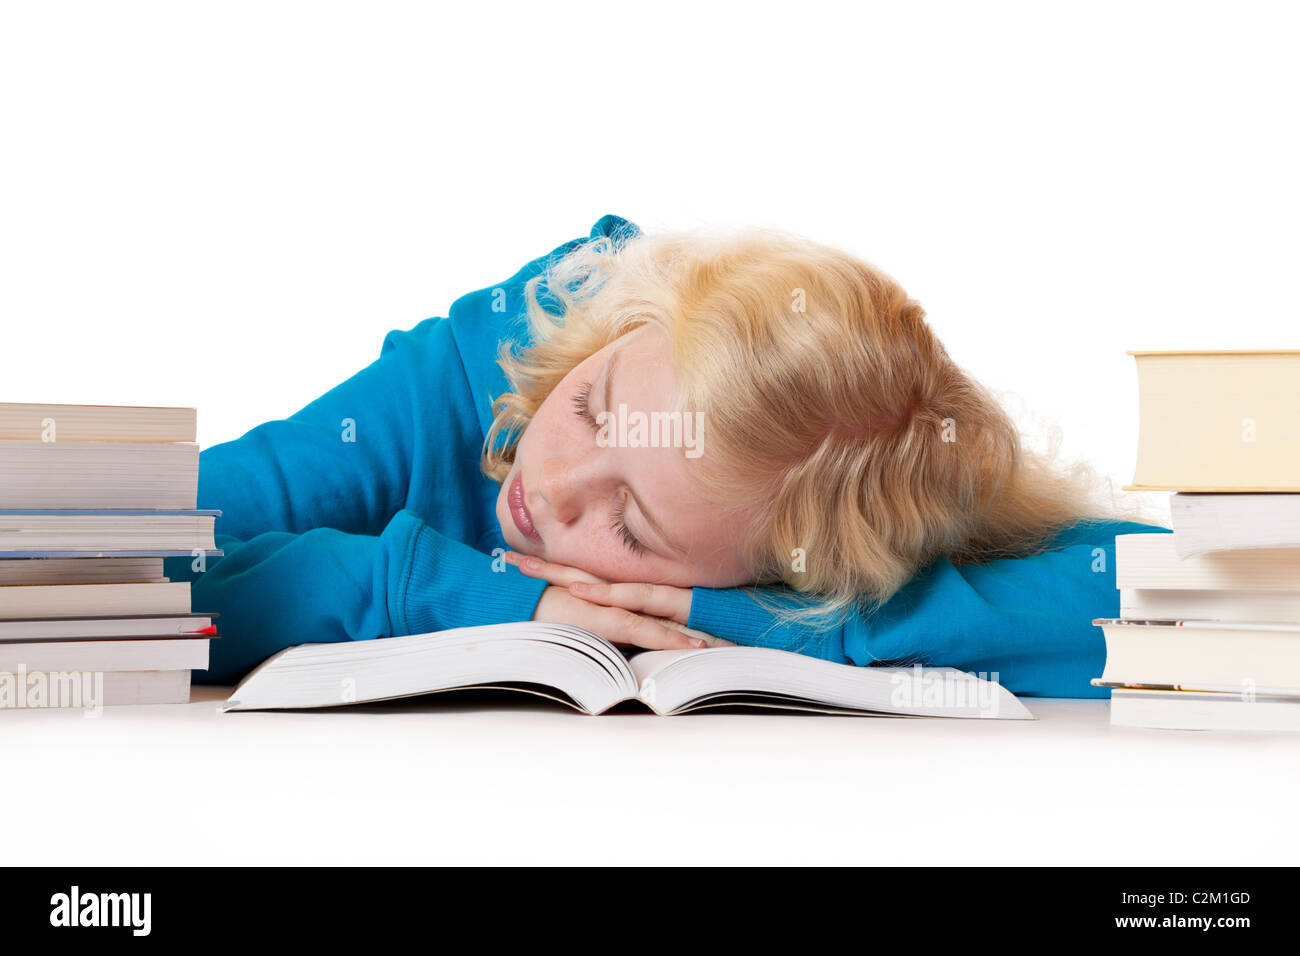 Pretty young blond schoolgirl sleeps on schoolbook.Isolated on white background. Stock Photo